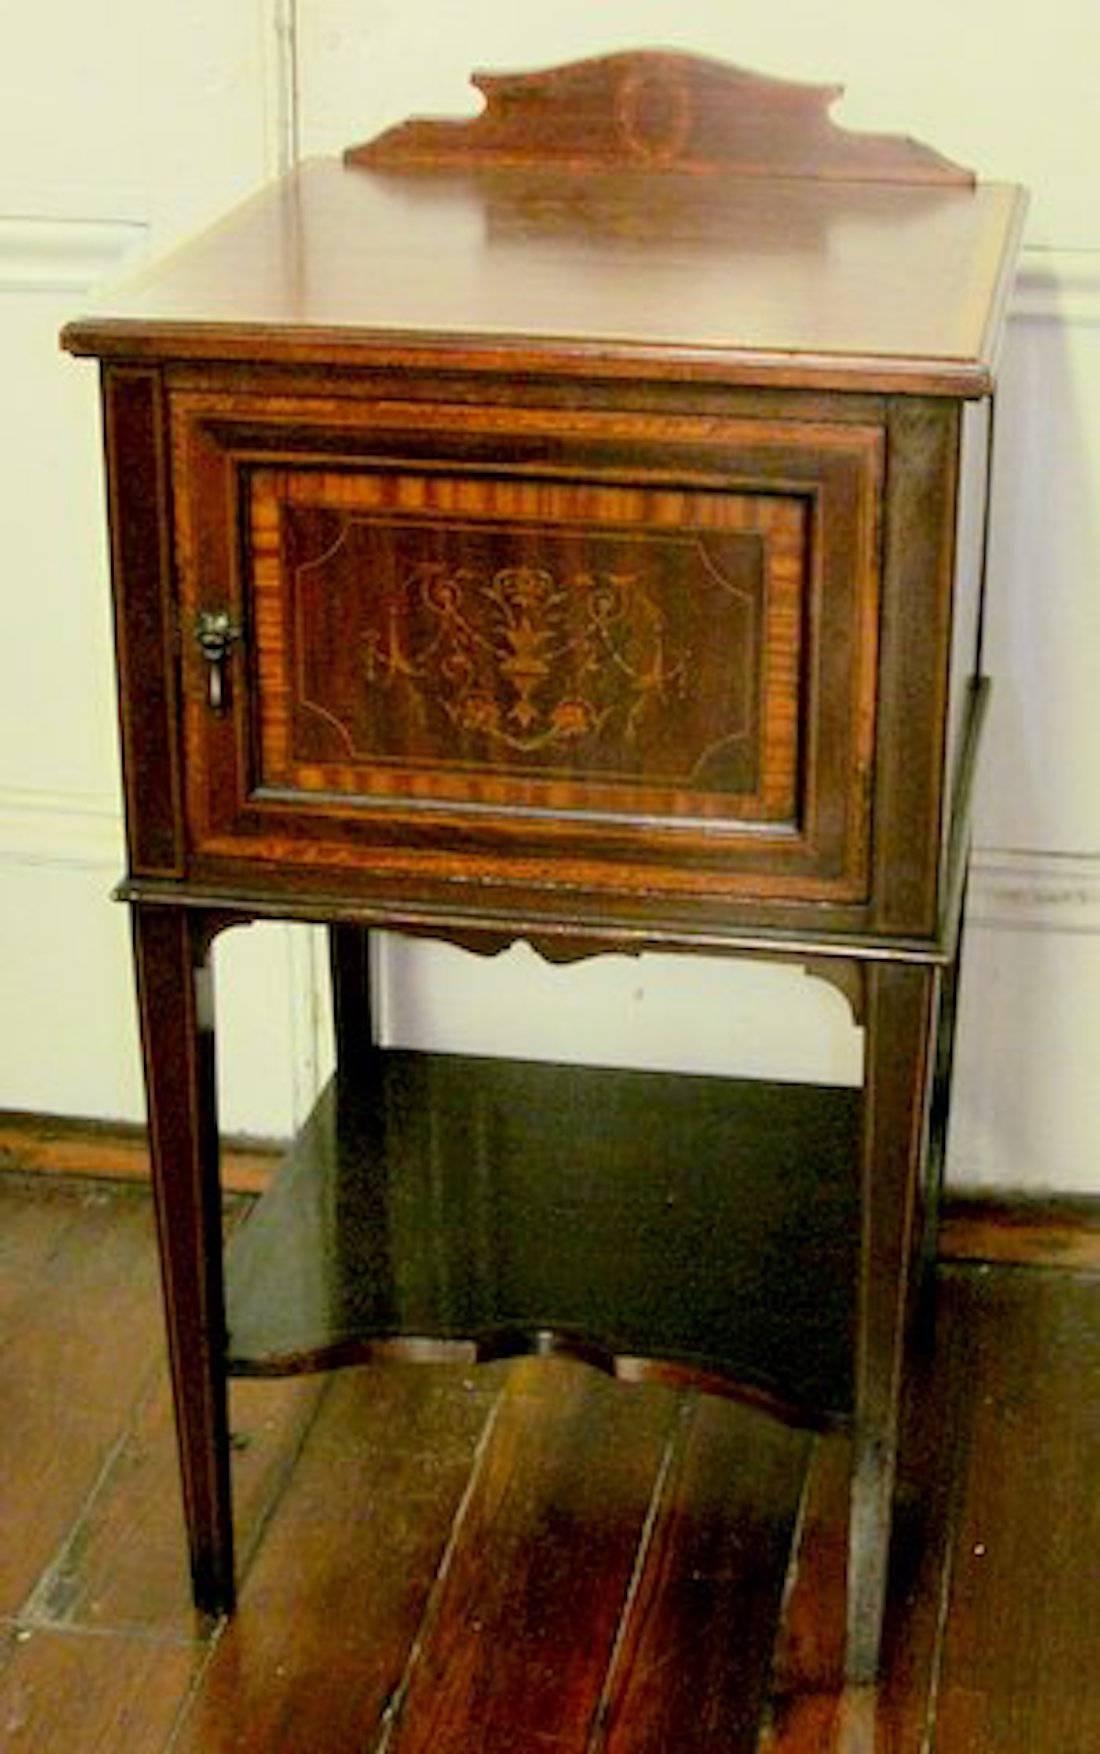 Fine quality antique English marquetry inlaid mahogany pot or bedside cupboard.

Please note exceptional neoclassical 